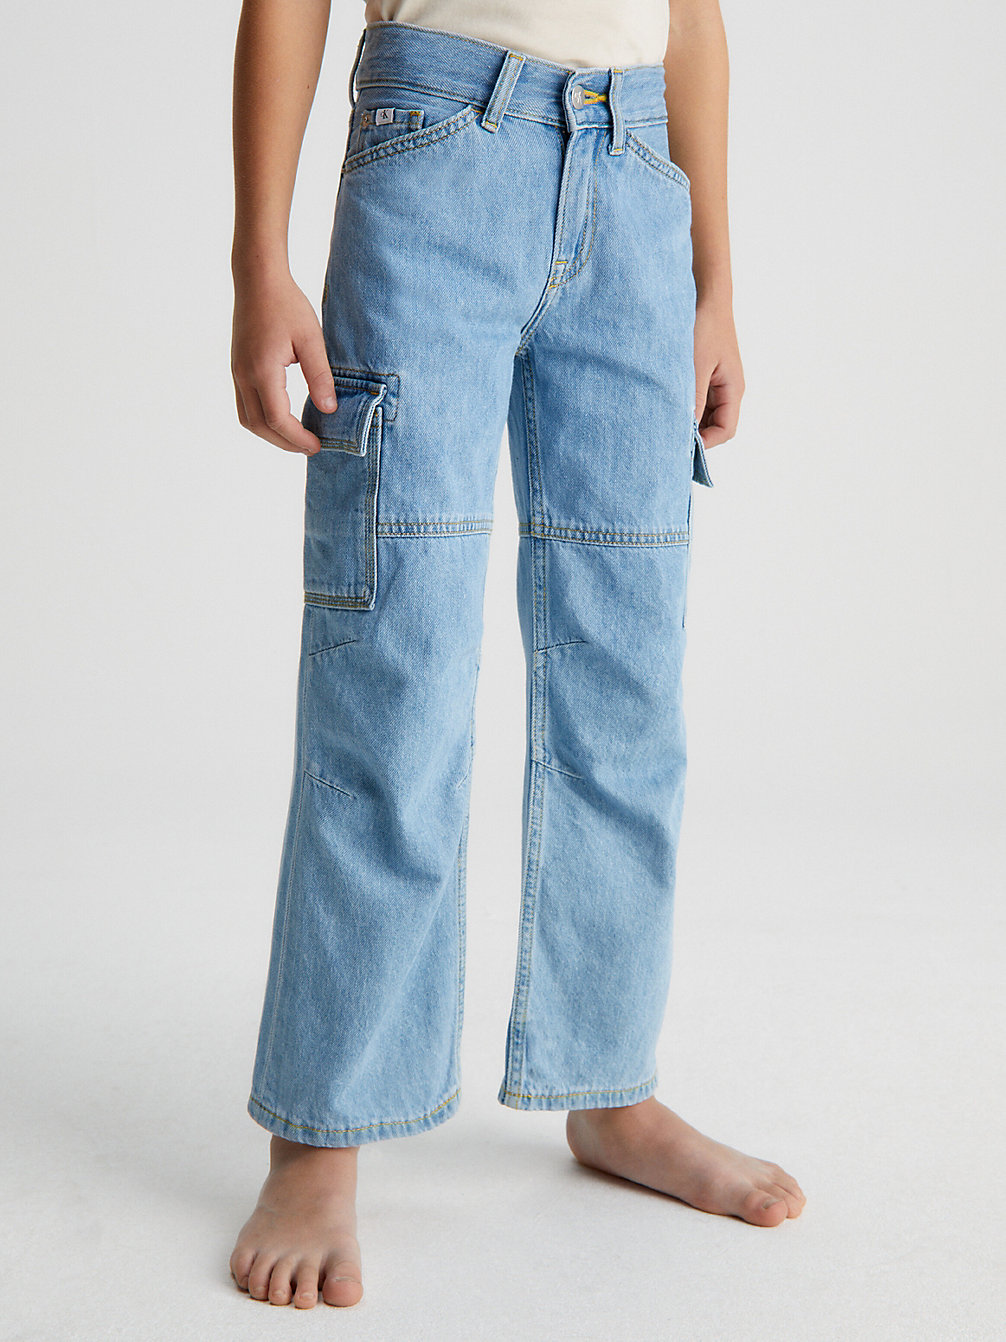 UTILITY WASHED BLUE Relaxed Skater Jeans undefined boys Calvin Klein